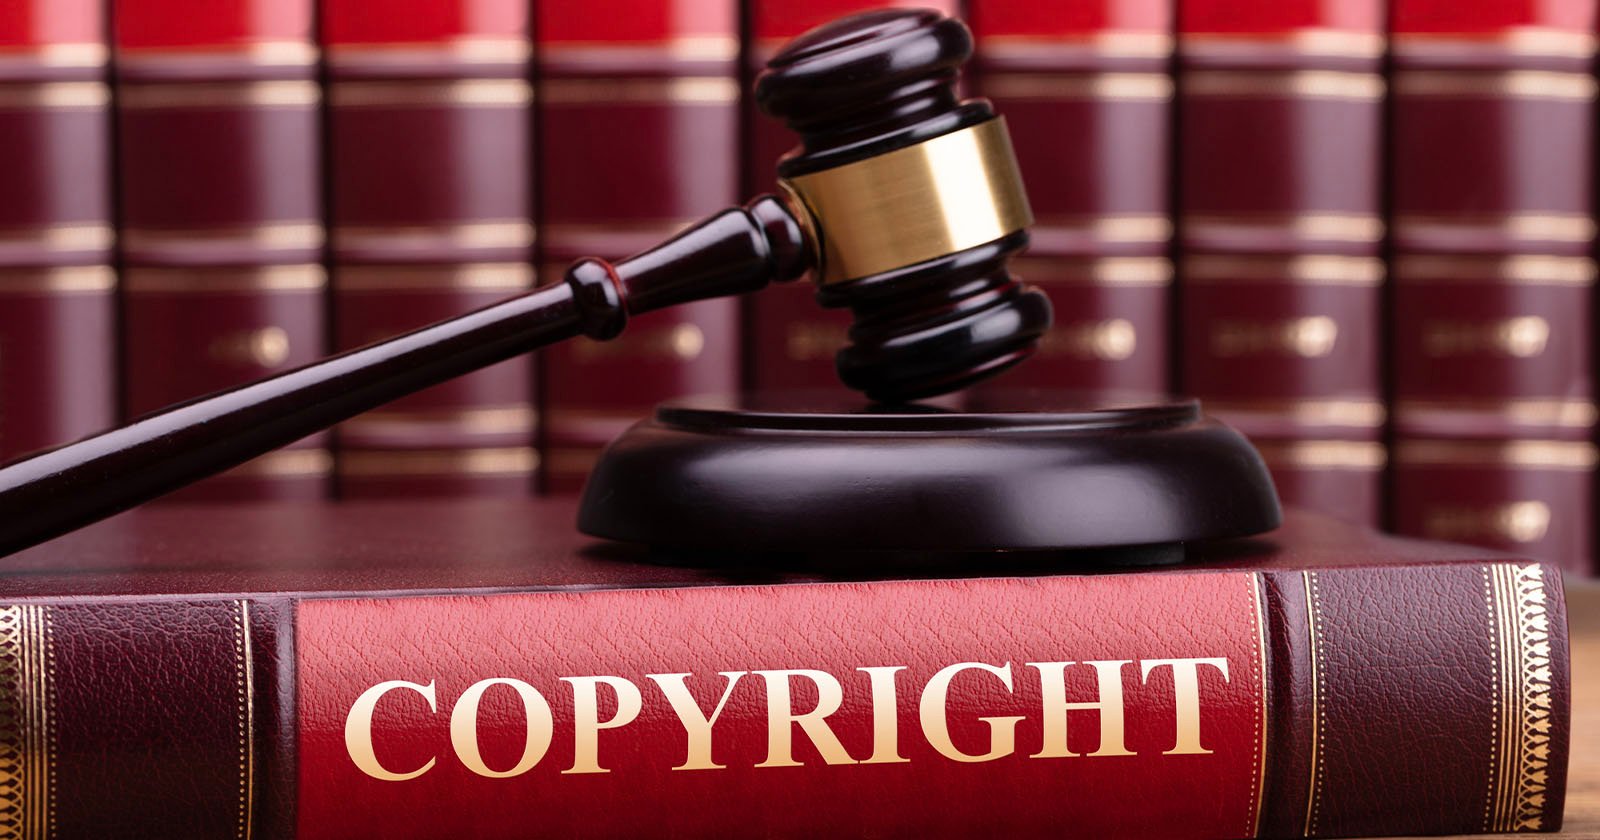 Photographer Awarded $6.3 Million in Copyright Infringement Trial